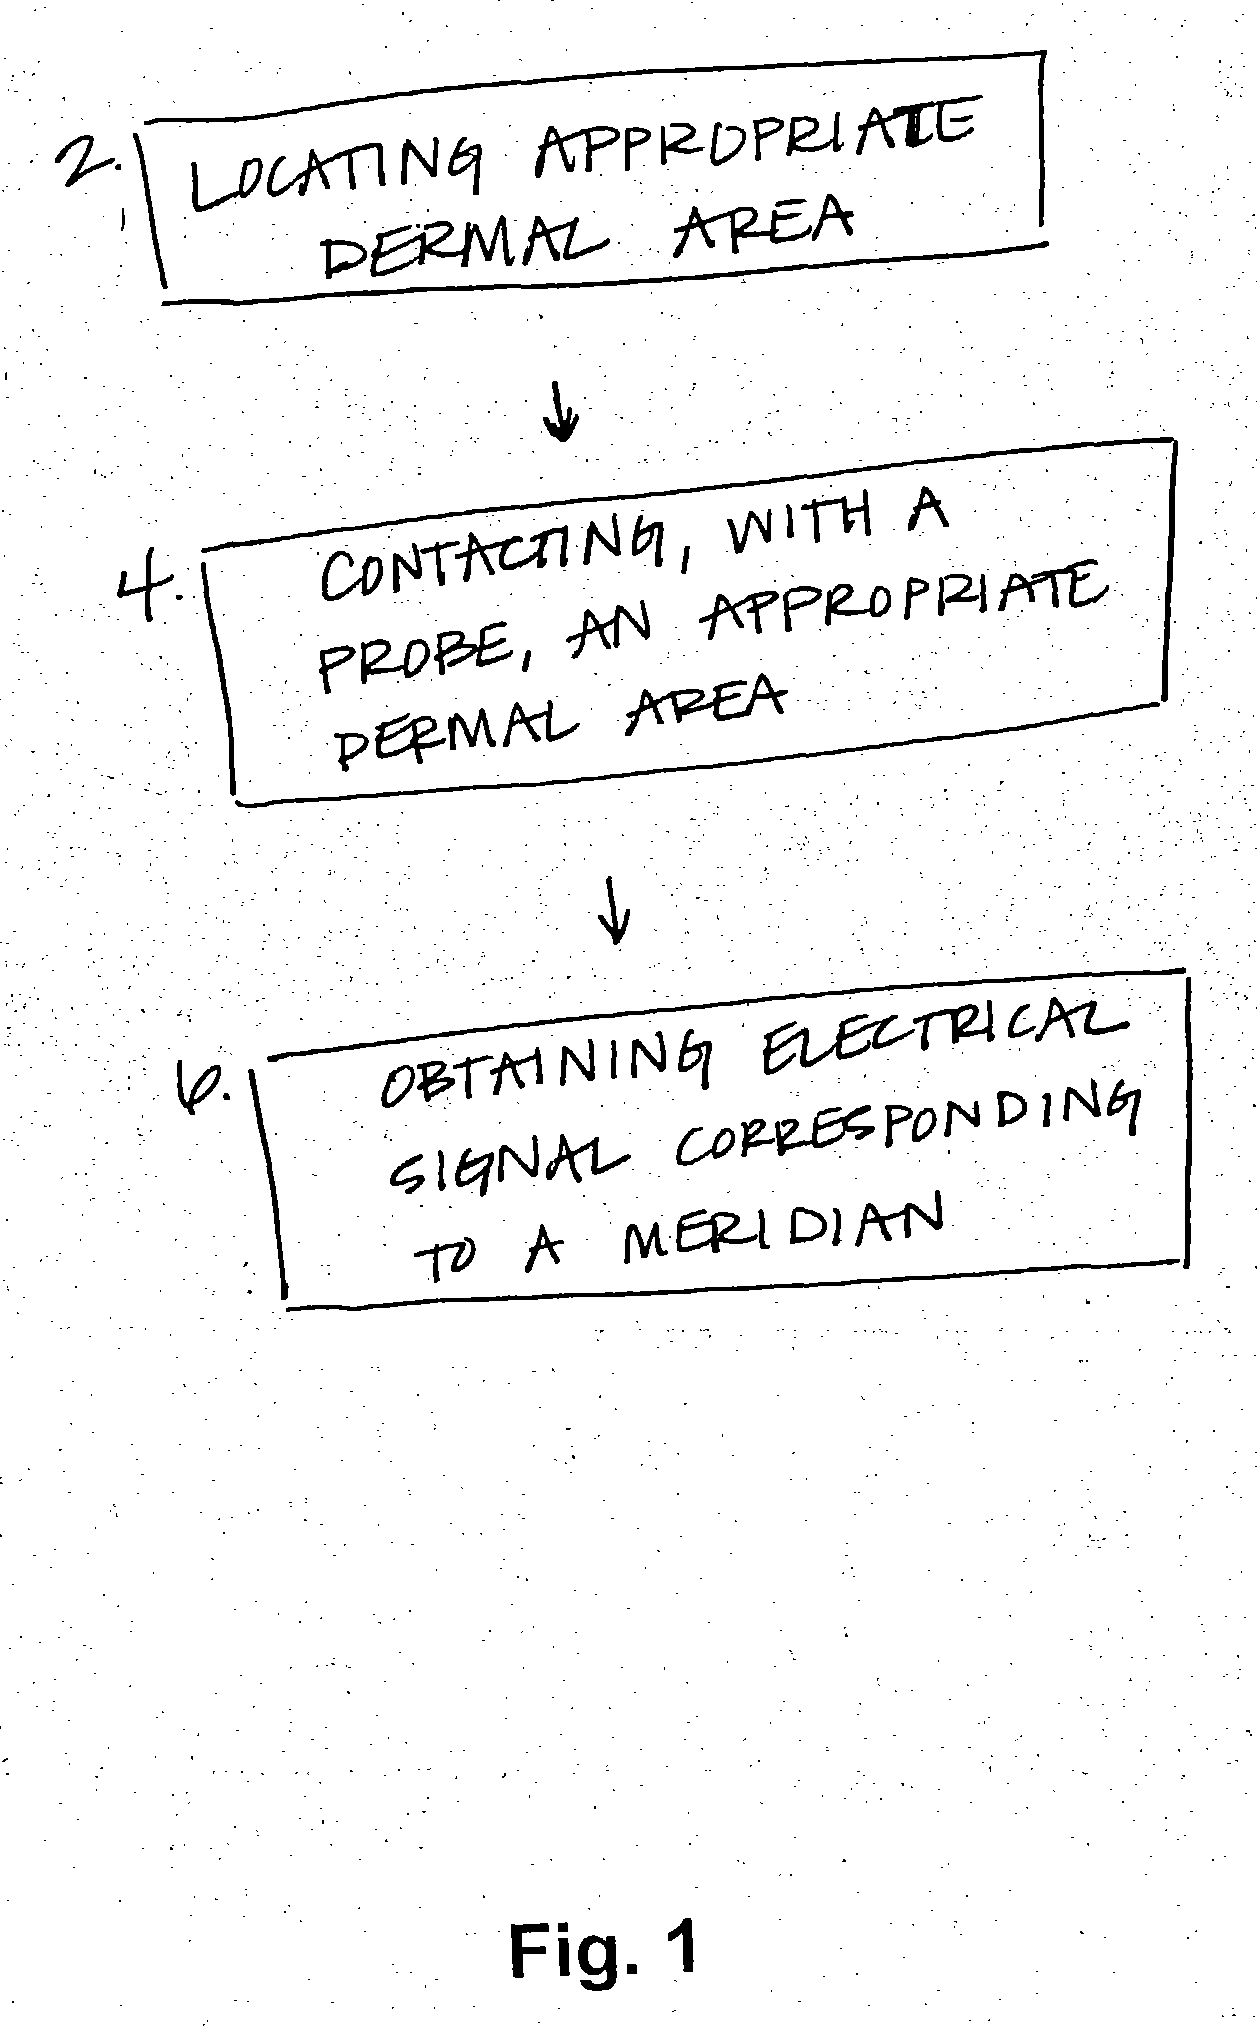 Methods for obtaining quick and repeatable electrical signals in living organisms